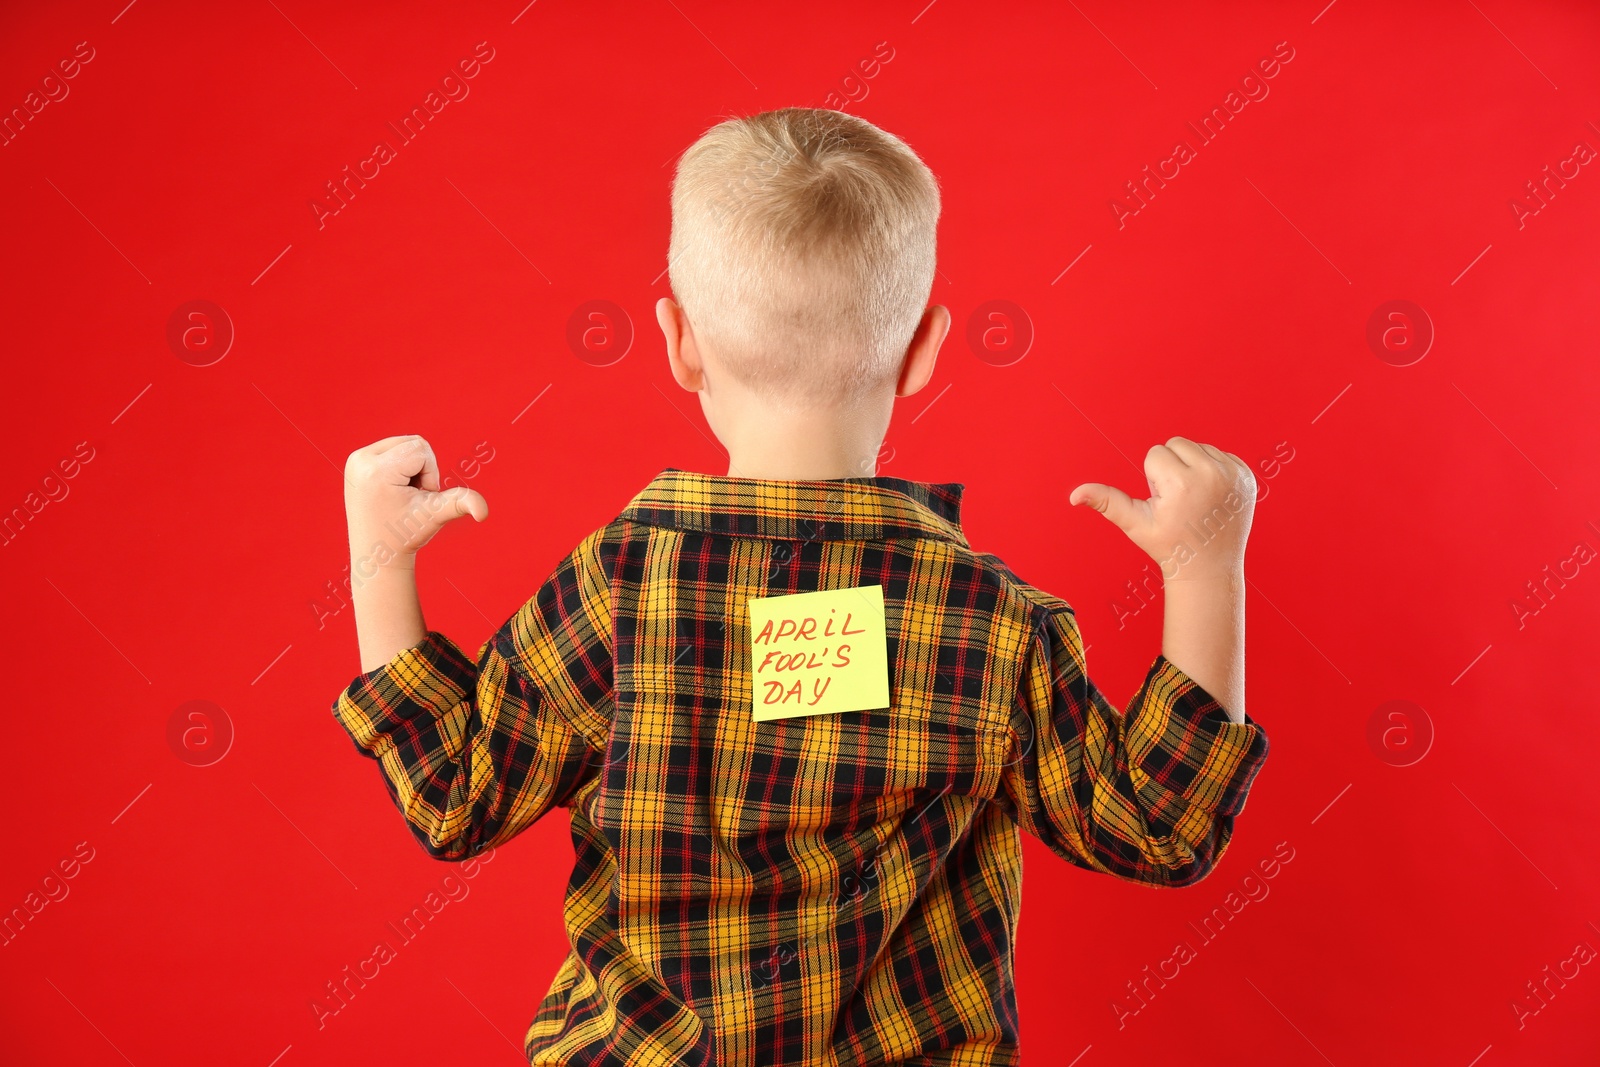 Photo of Little boy with APRIL FOOL'S DAY sticker on back against red background